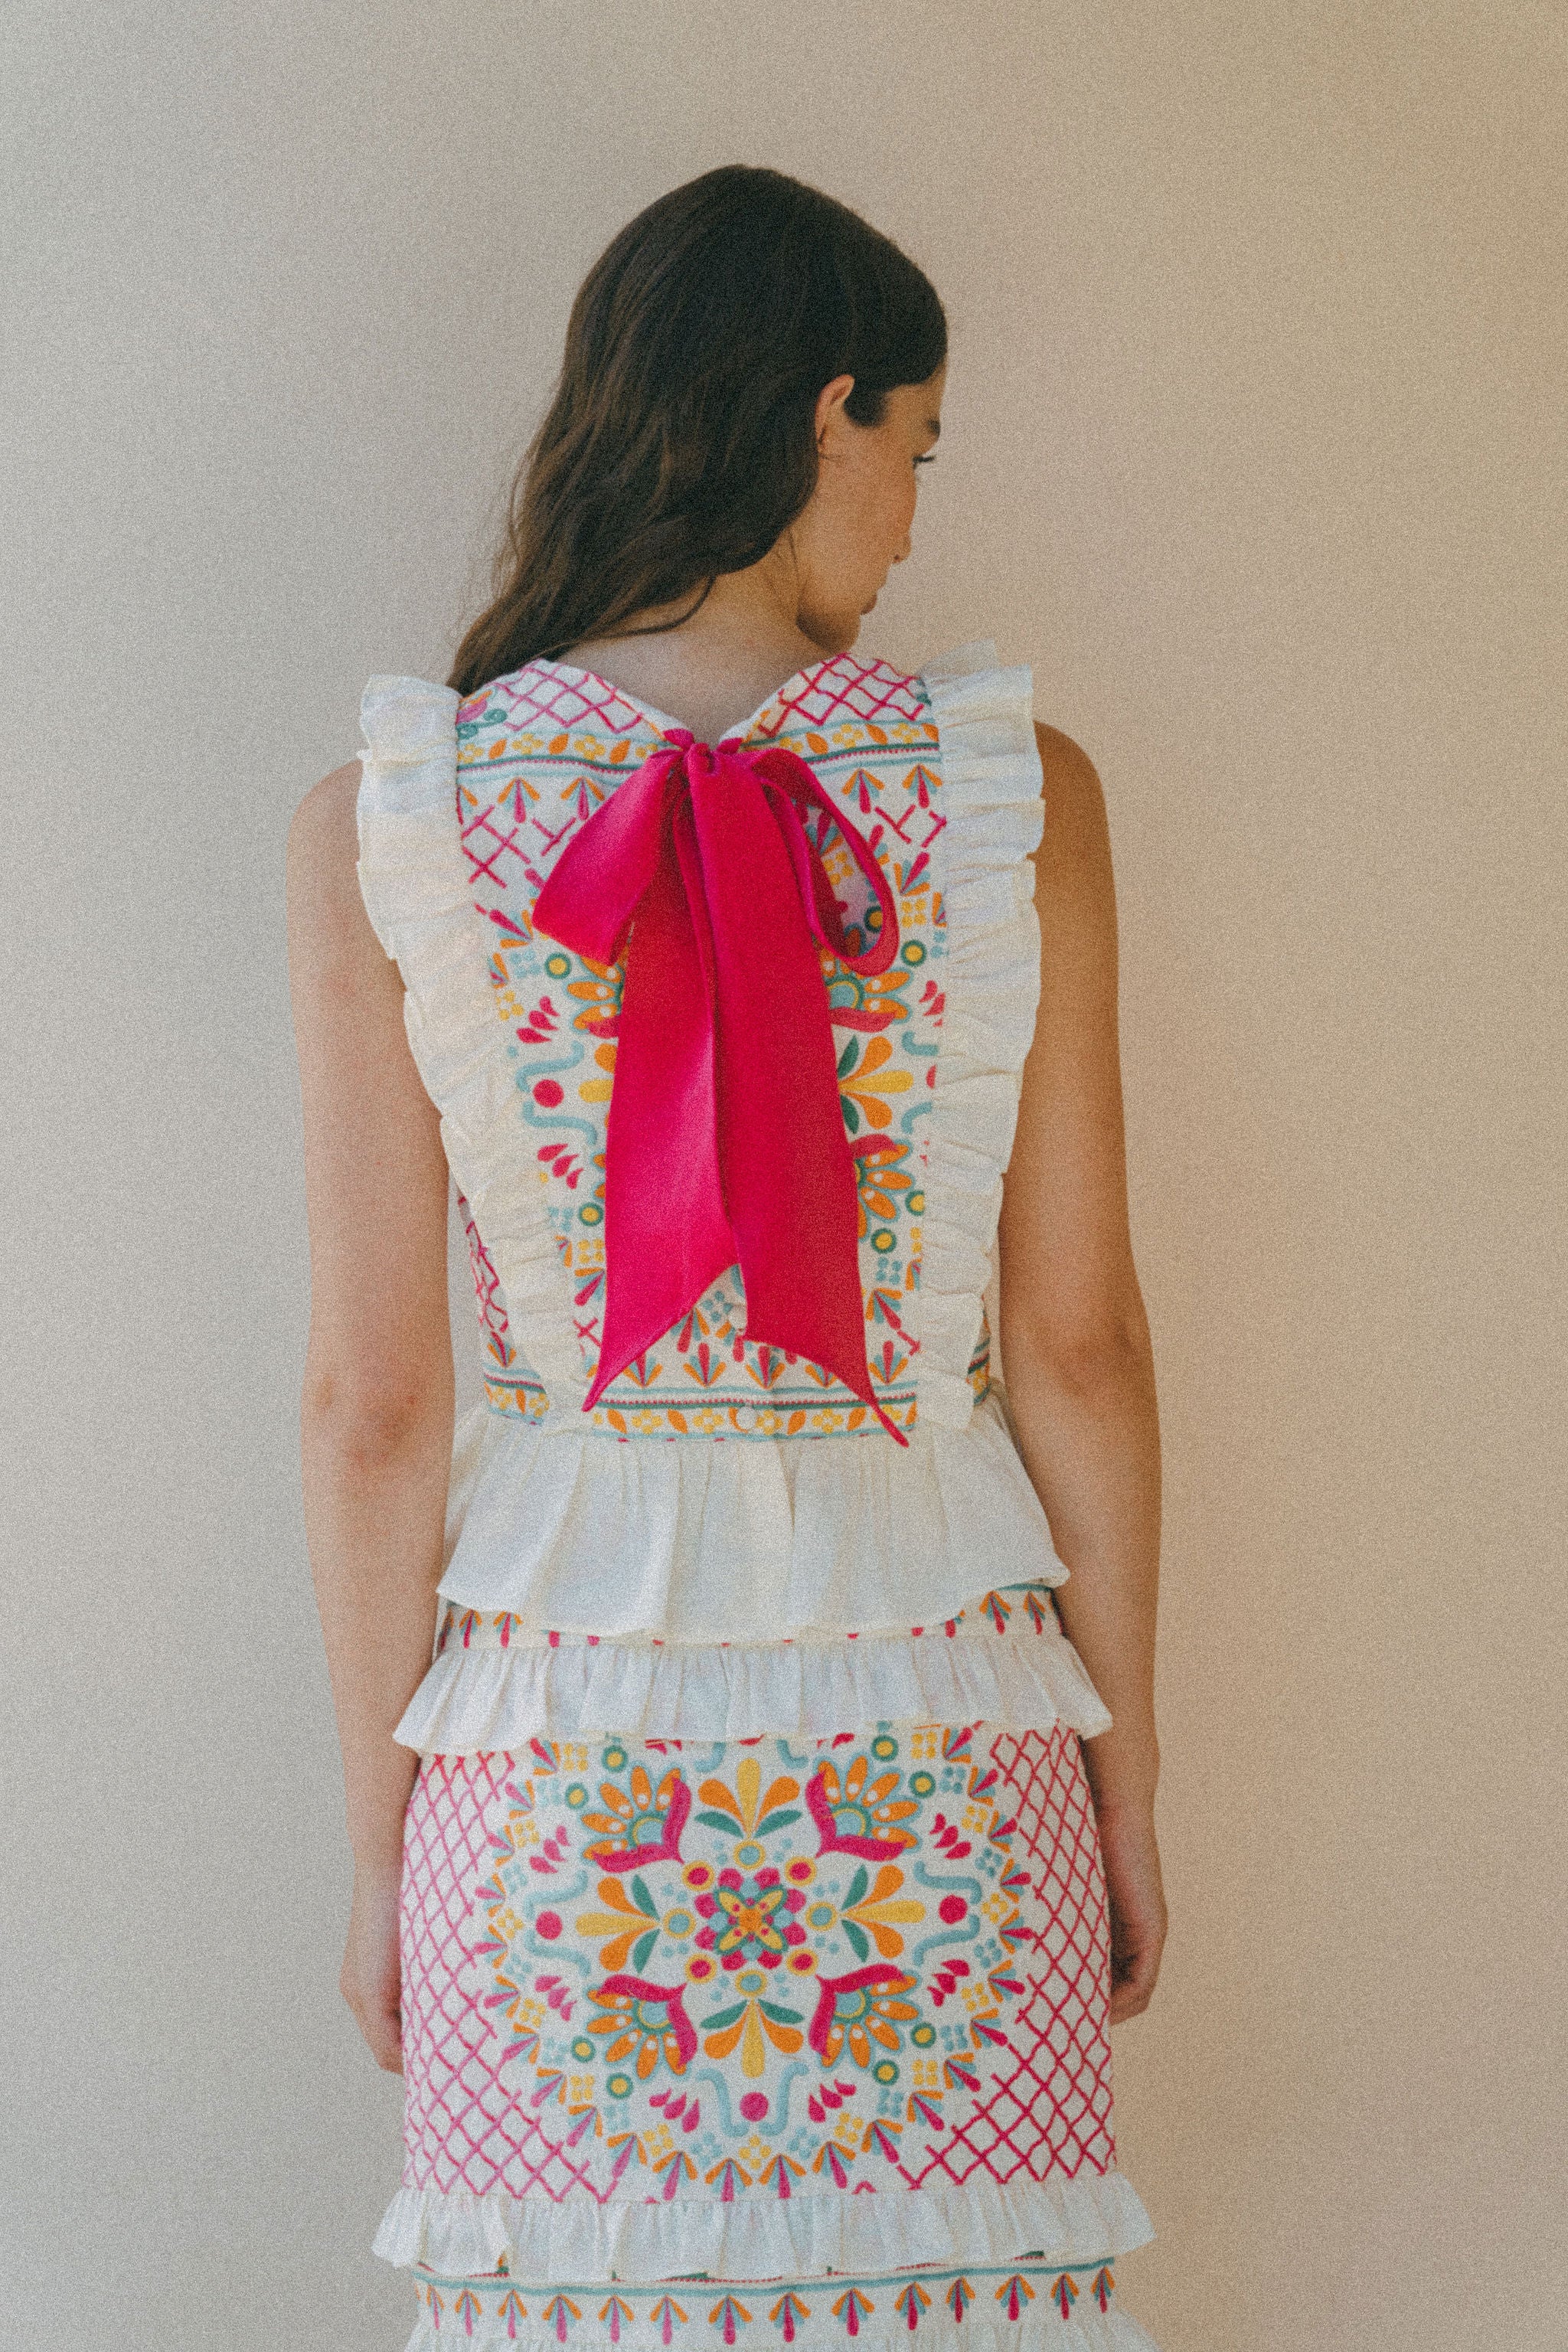 colourful embroidered top and skirt with bright pink bow